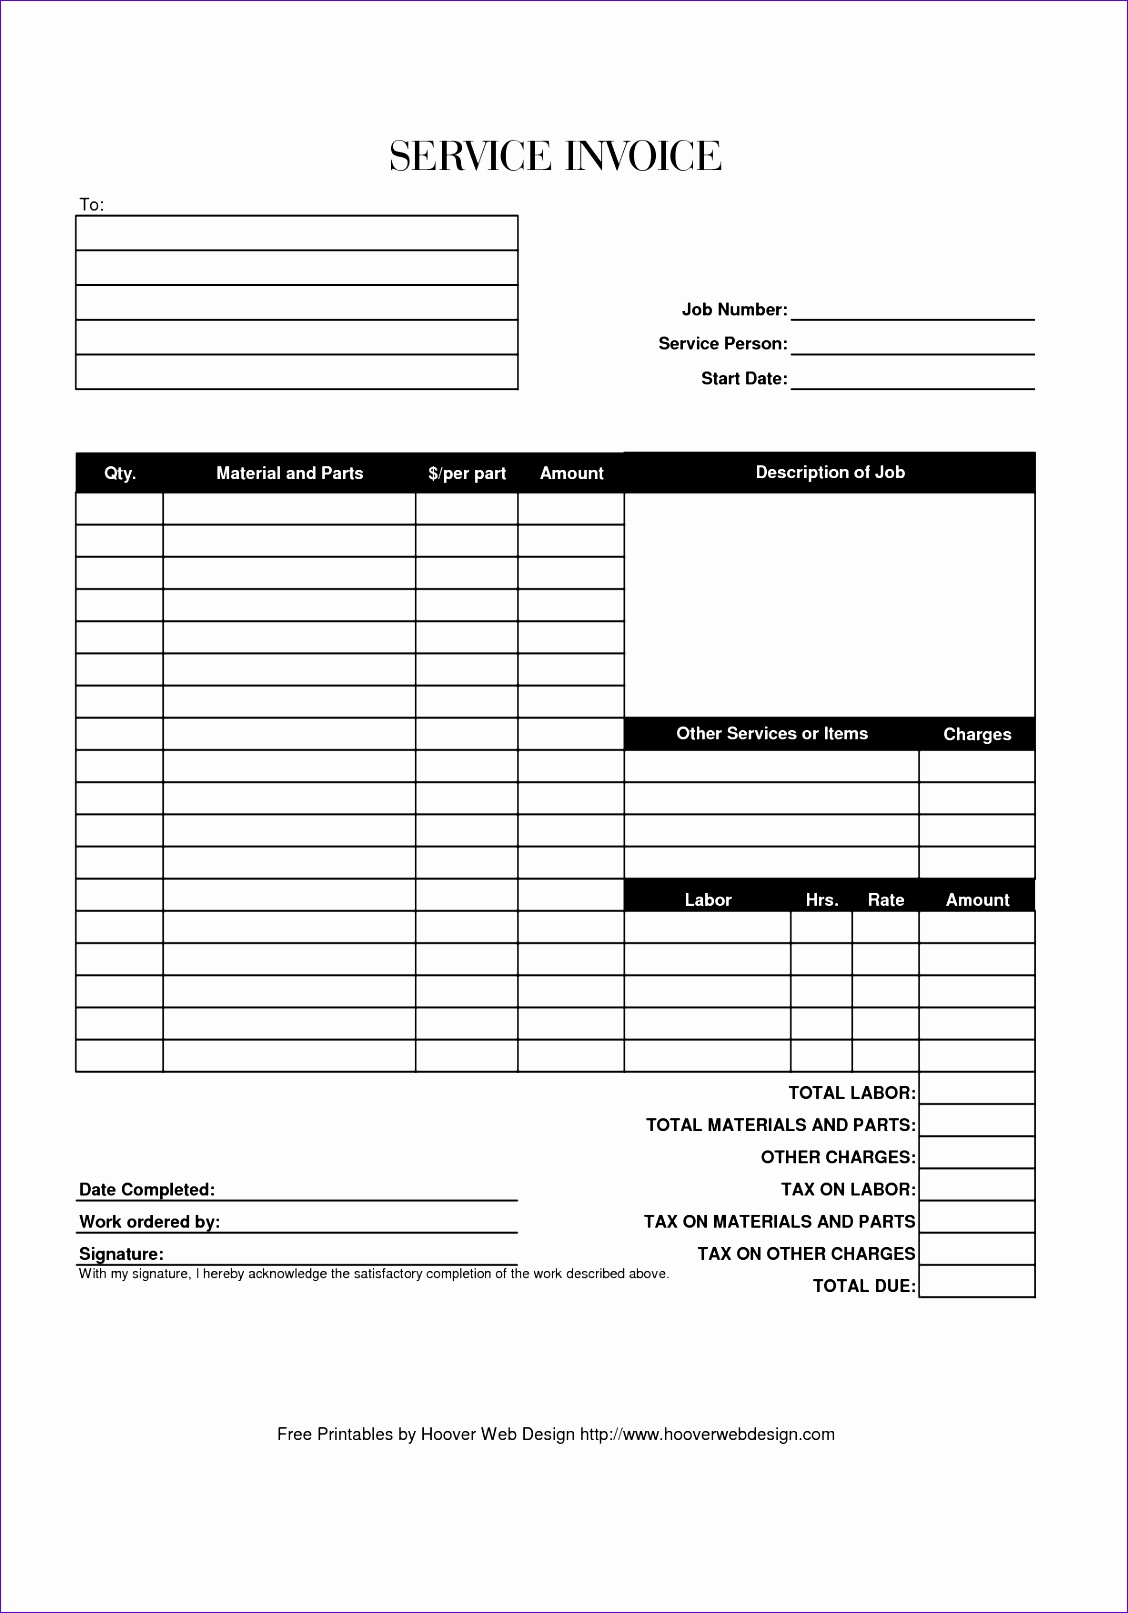 job invoice template pdf best photos of printable job invoice free service employee template excel template word for forms pdf online construction sample jaQLcV